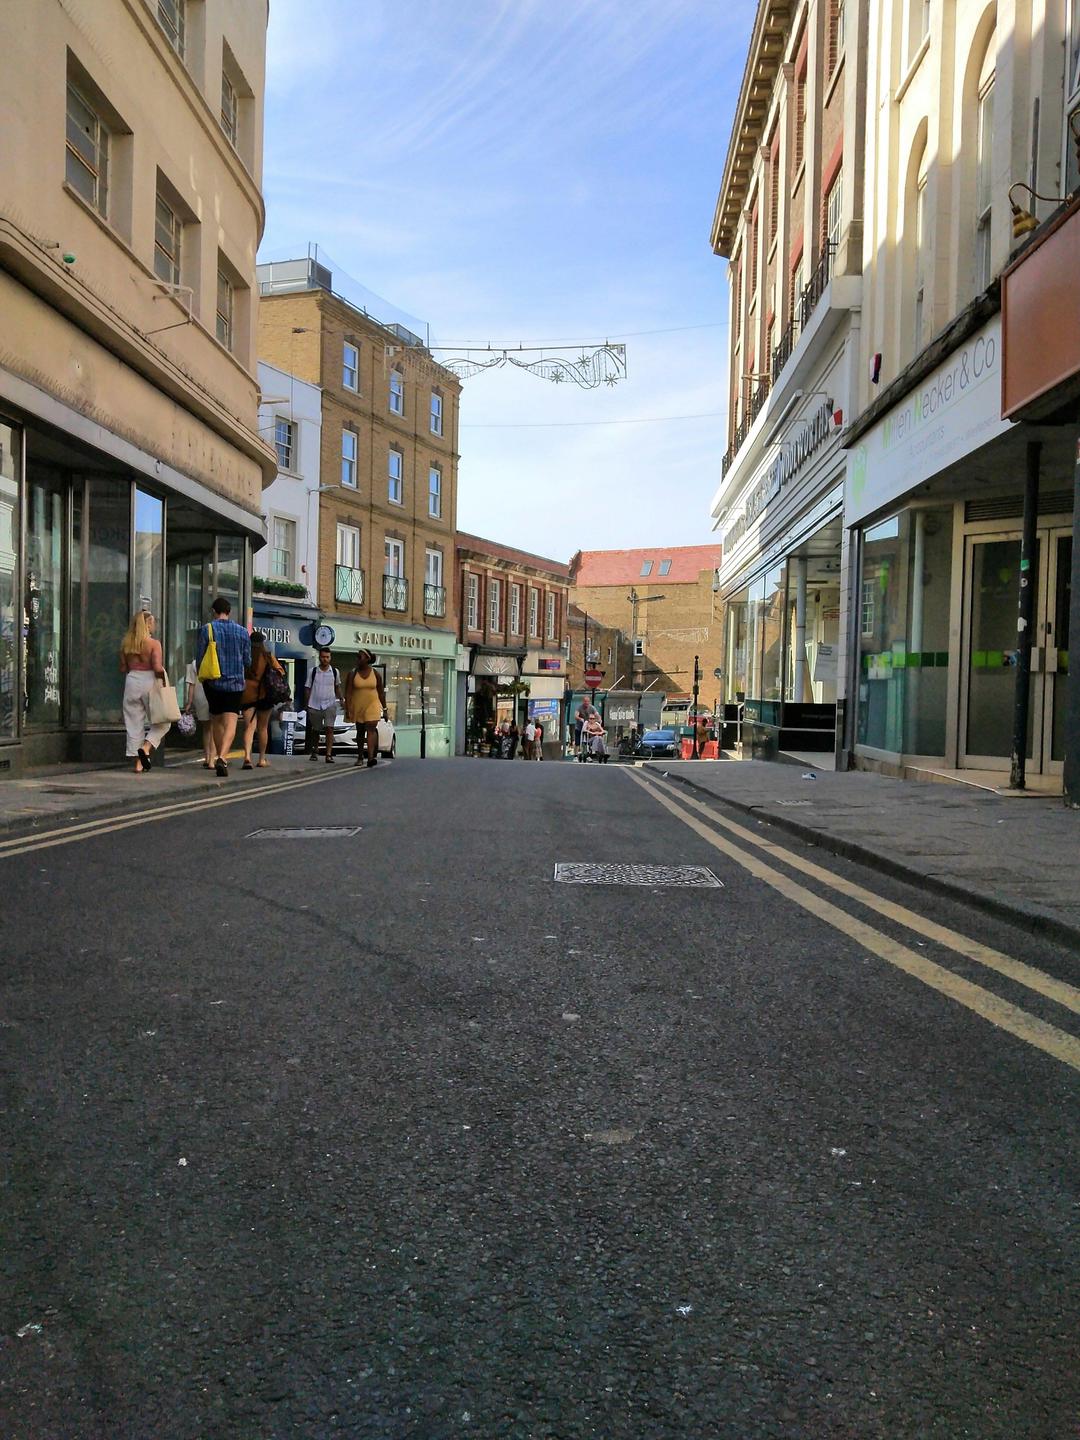 Street view of margate